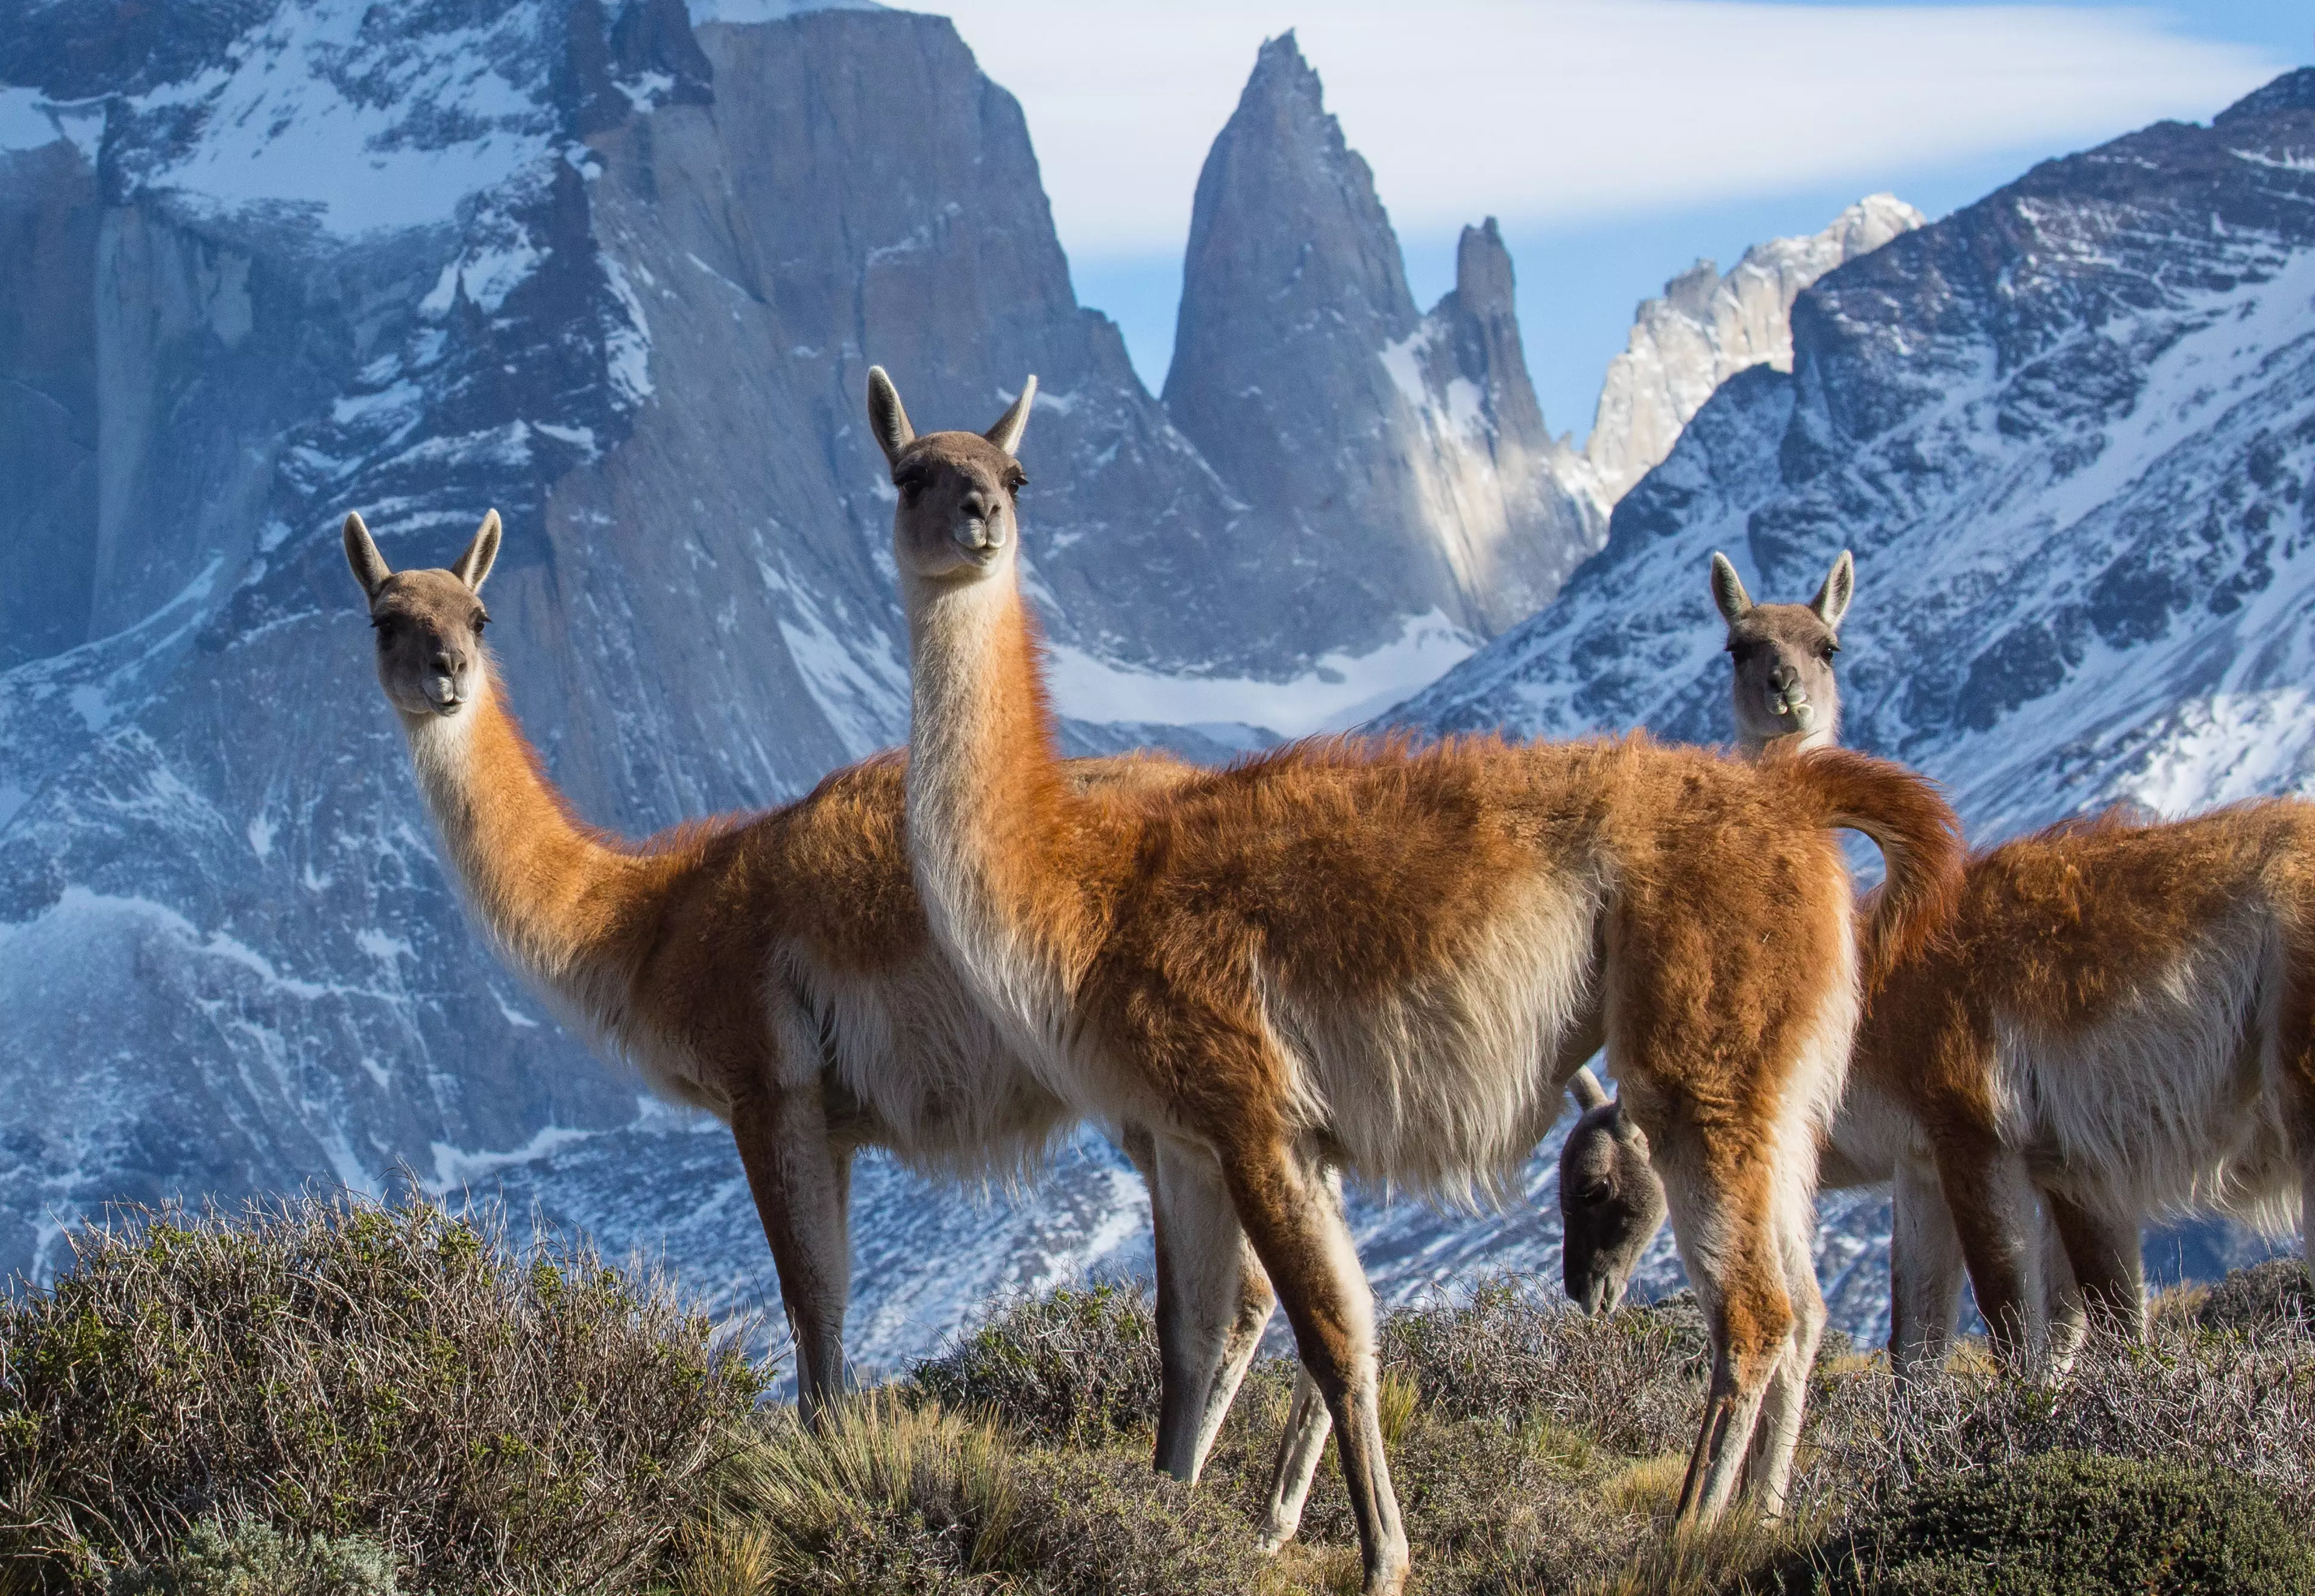 Episode two will feature Guanaco who have been snapped here in the Torres del Paine National Park, Chile. (